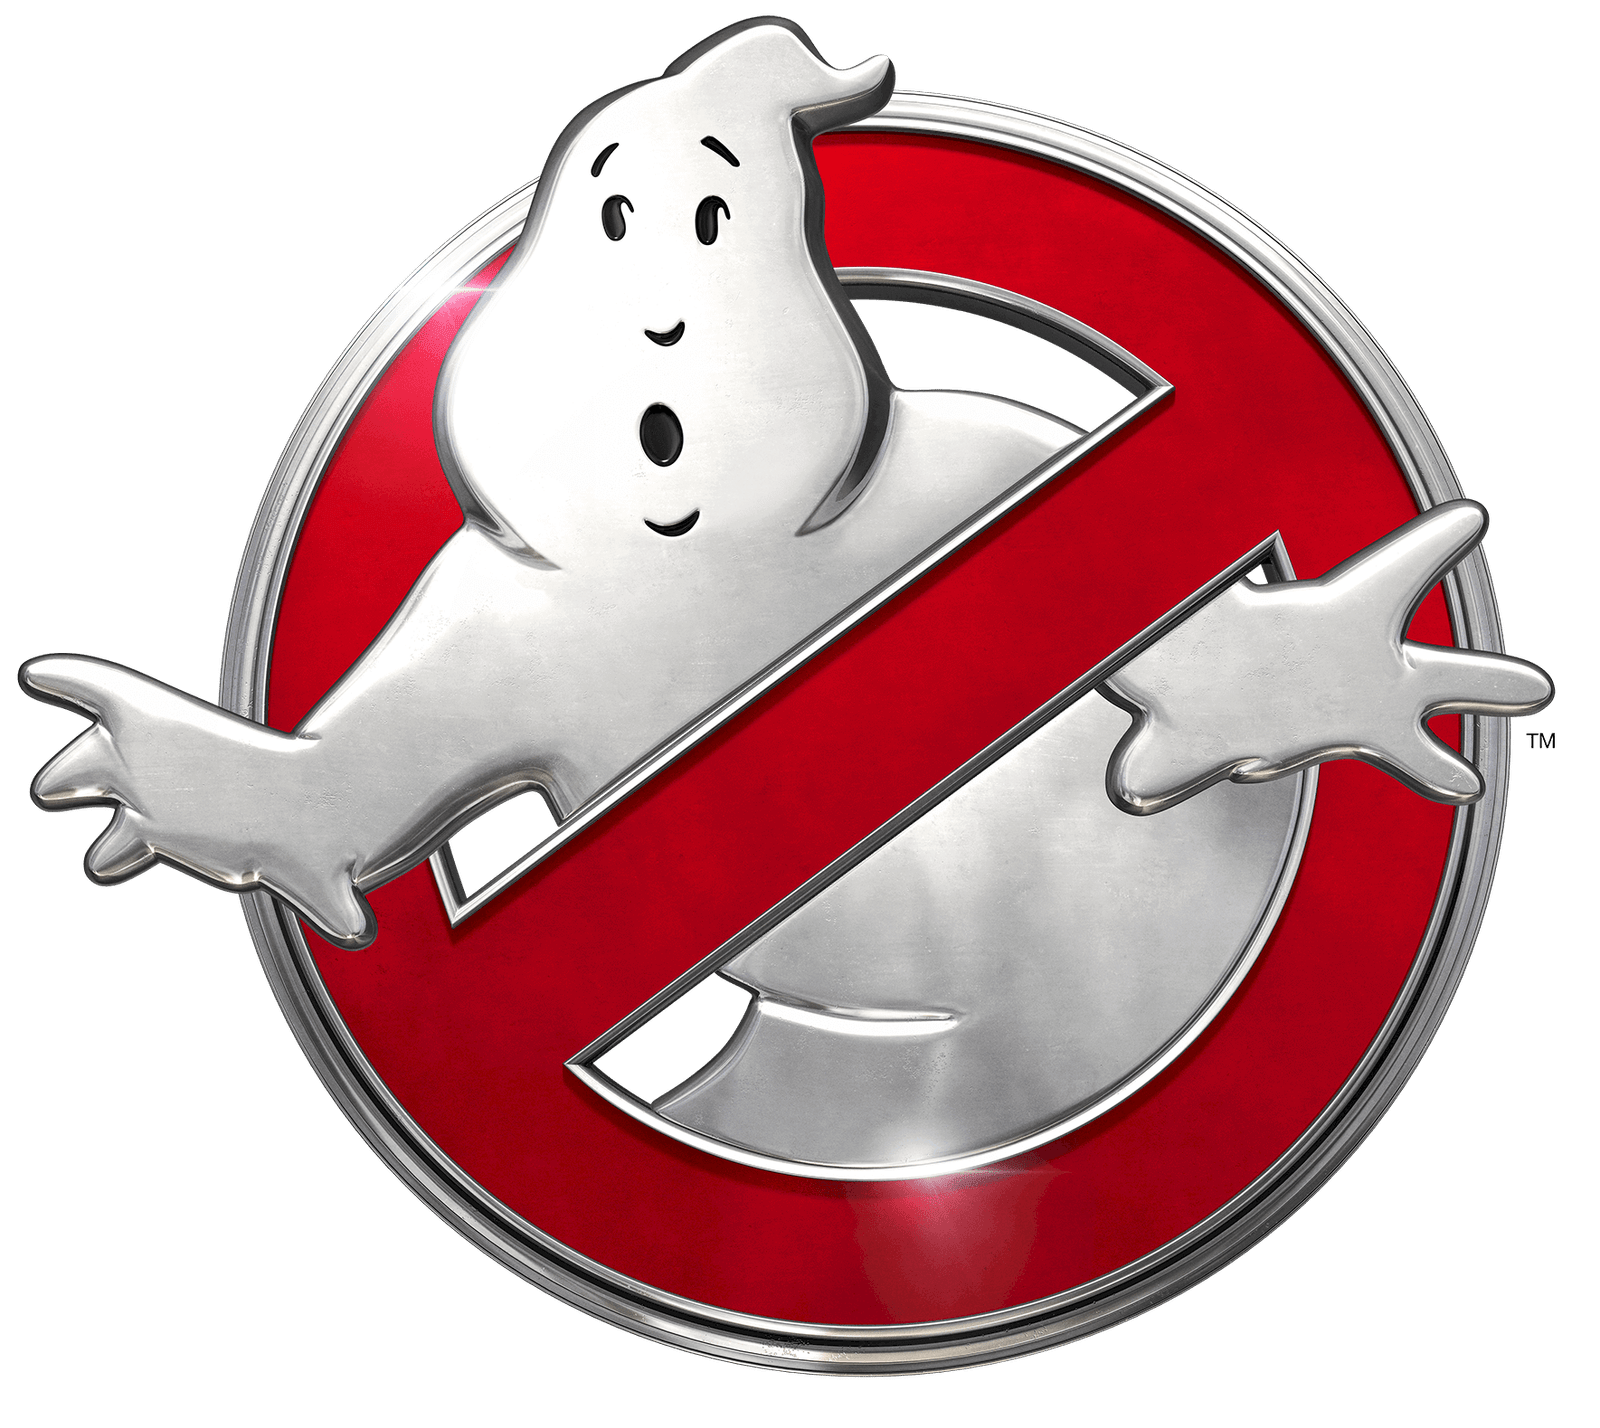 Ghostbusters logo and Its history LogoMyWay